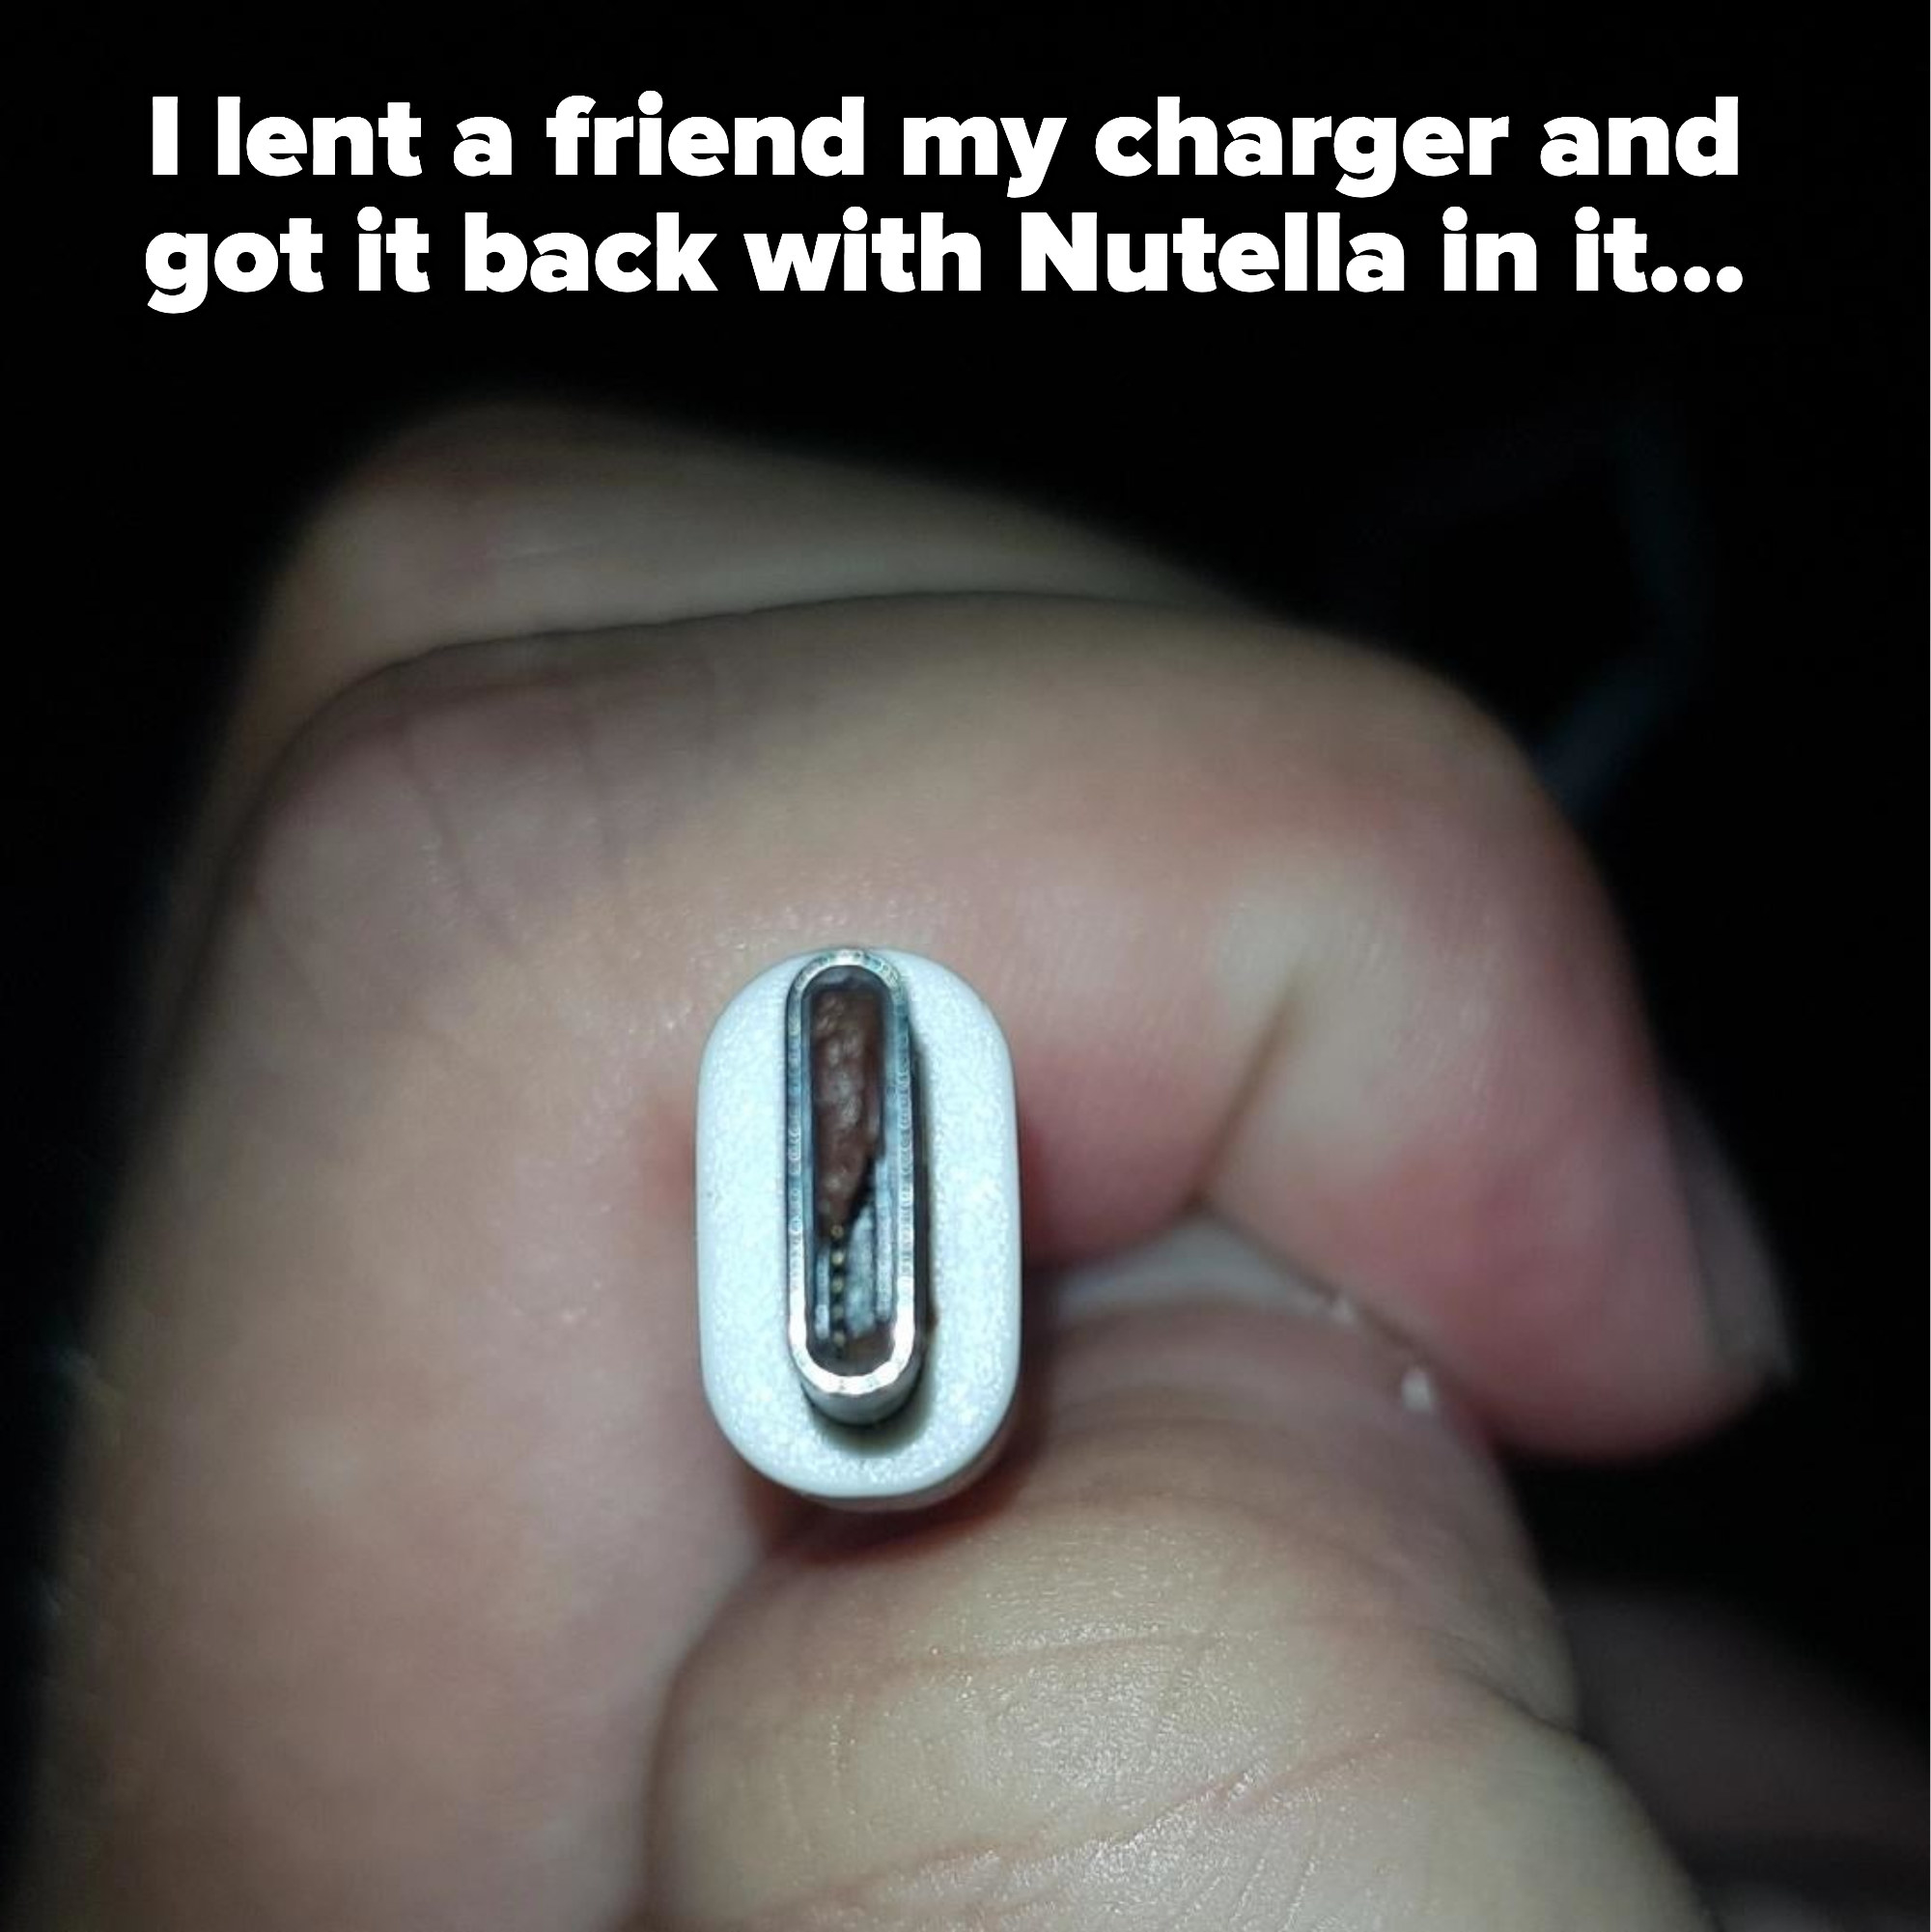 Nutella jammed inside a charger cable